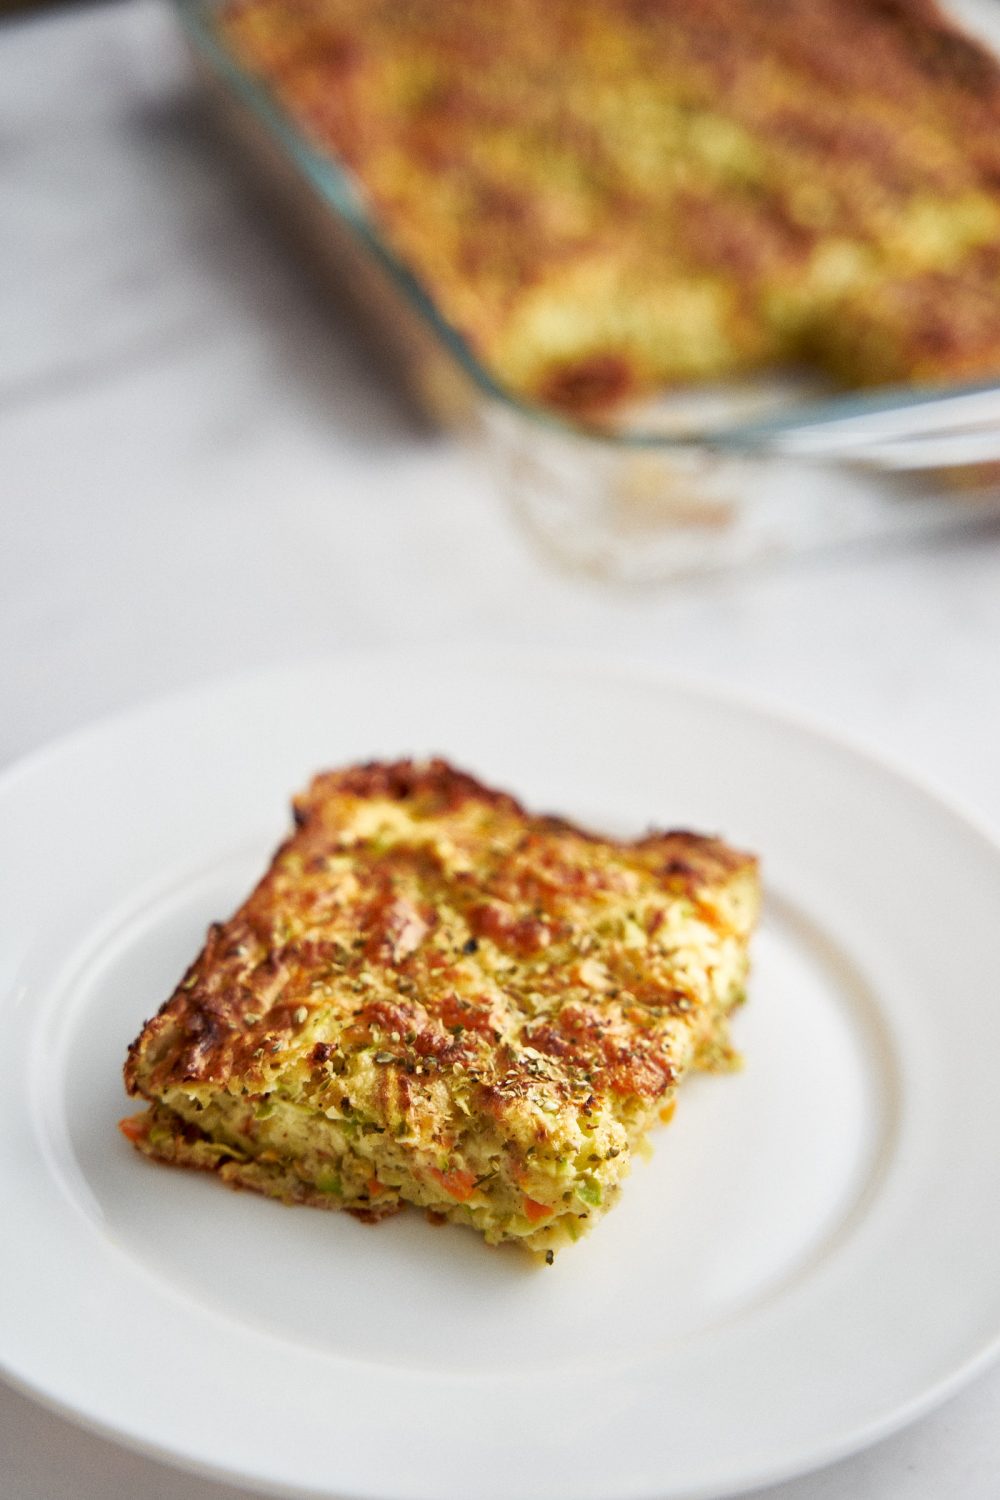 Oven Baked Zucchini Pie with cheese in 15 minutes